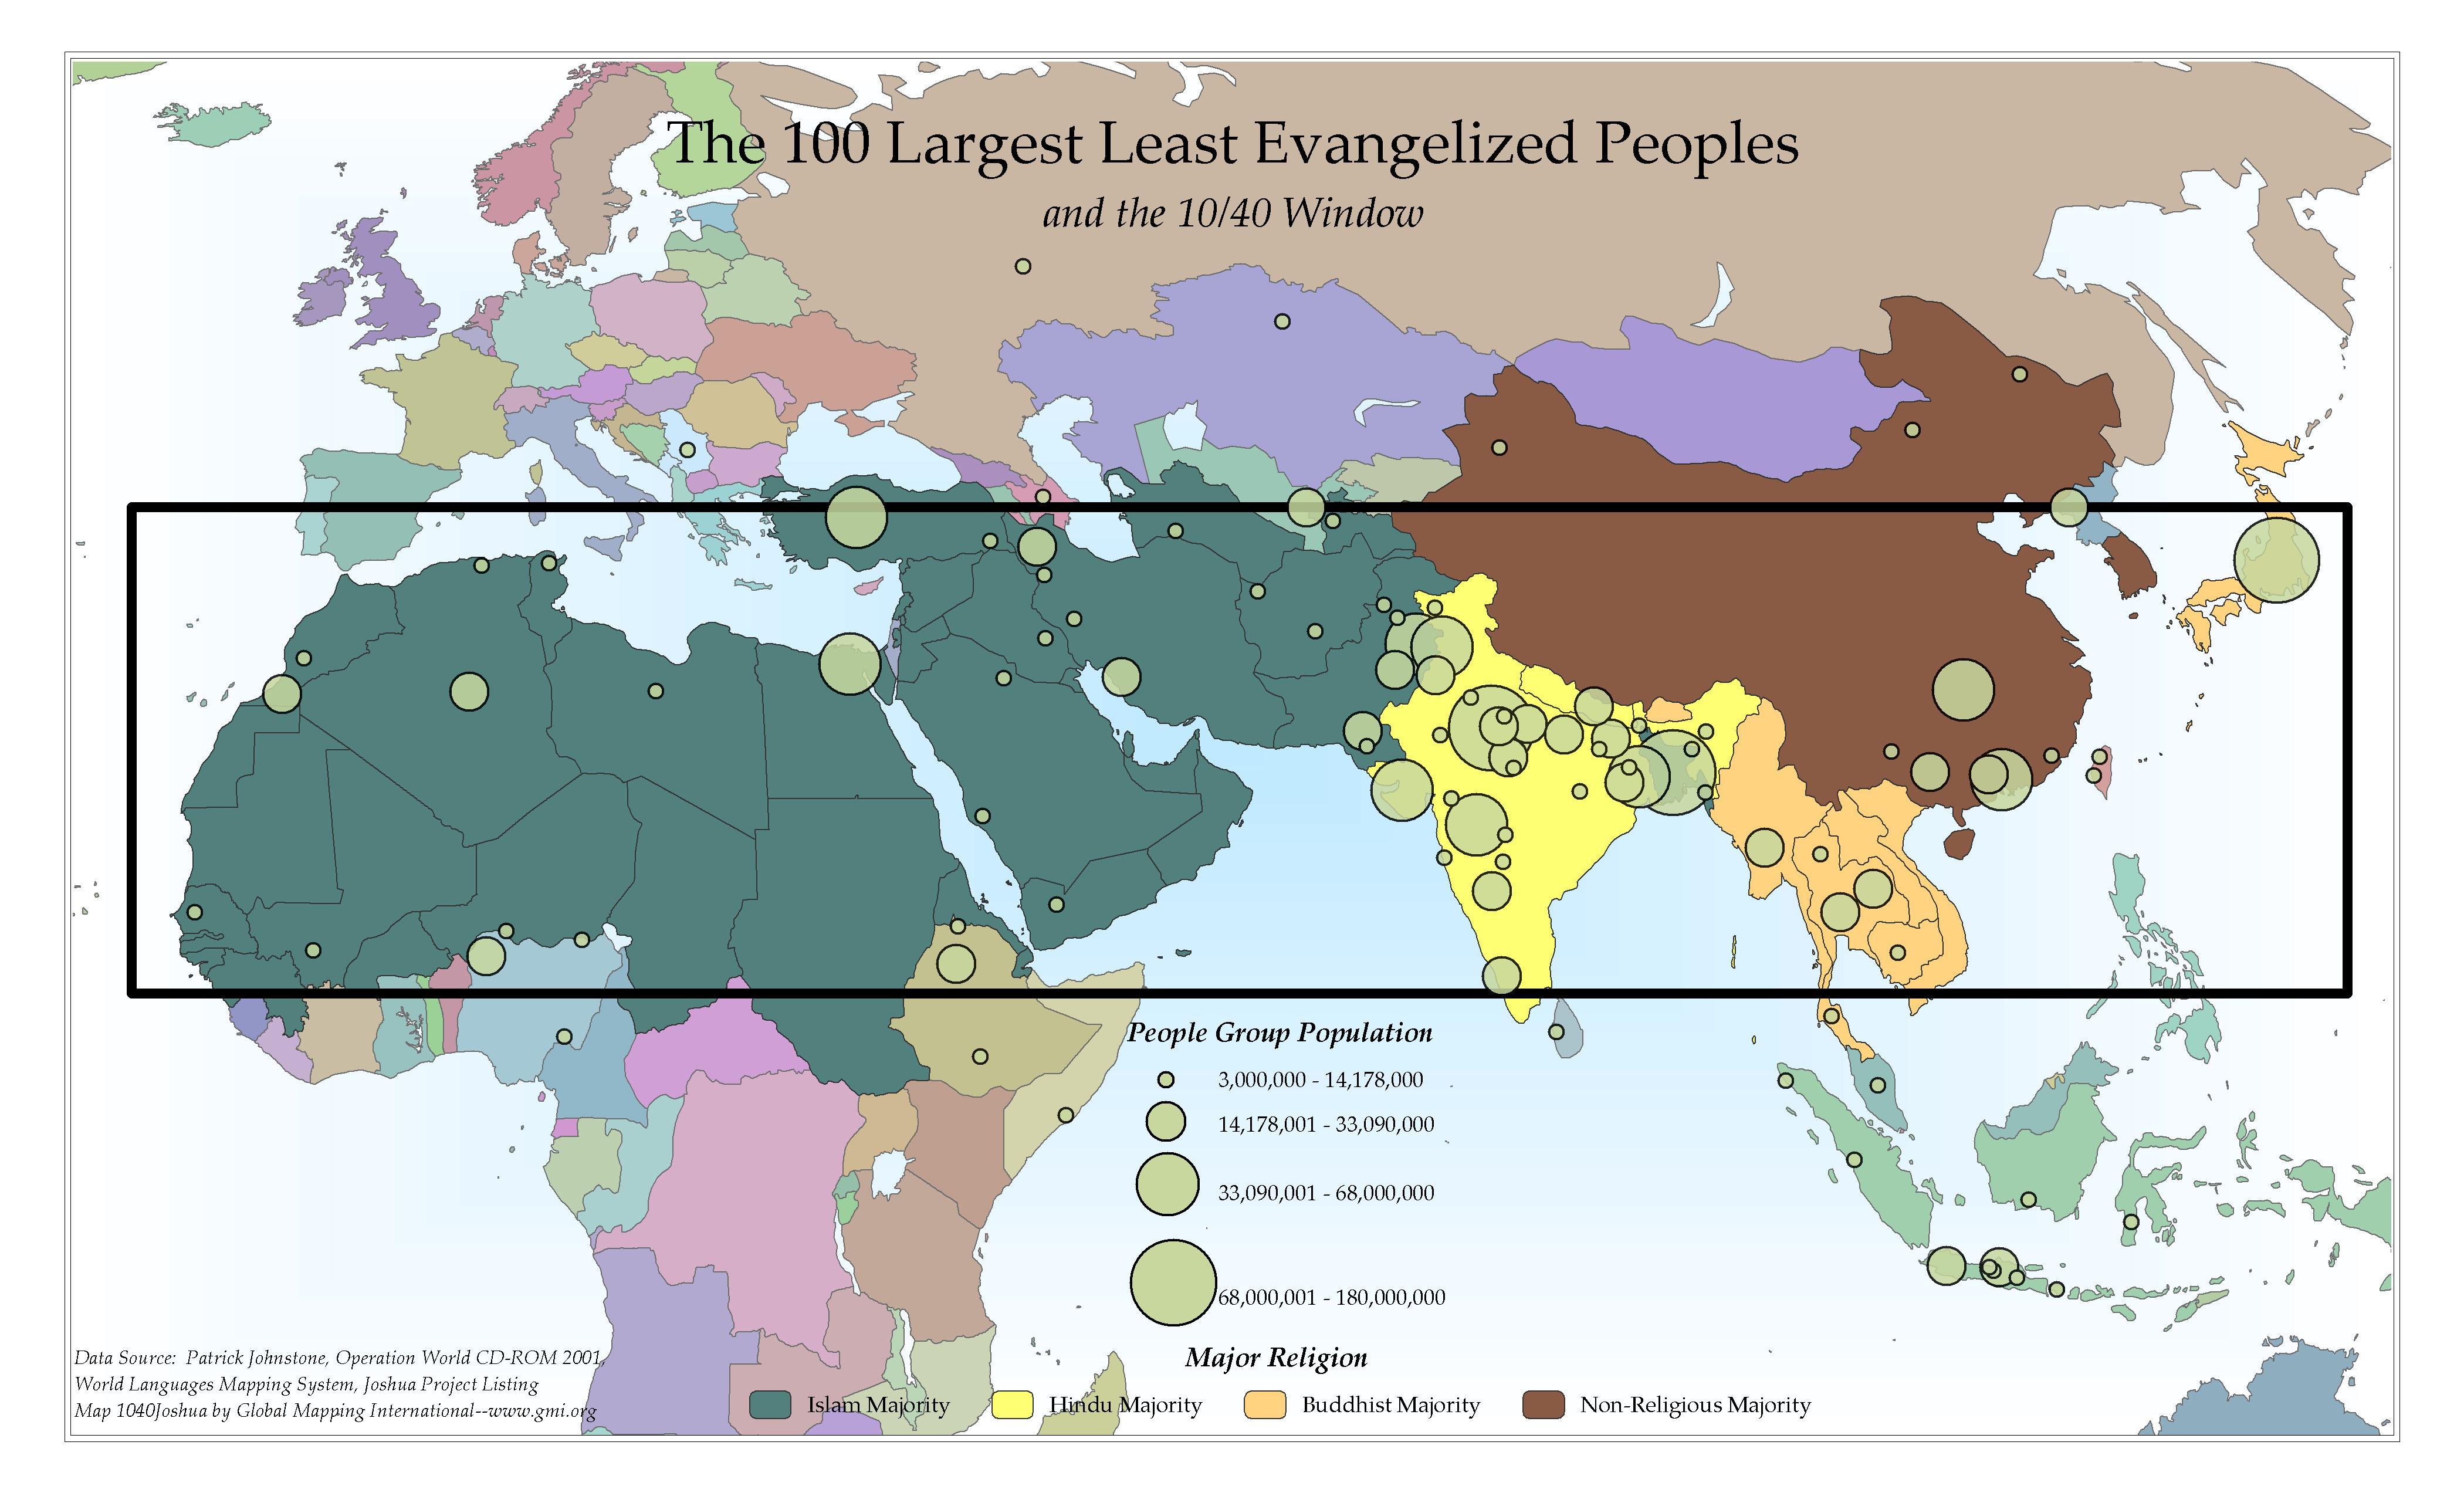 The 100 Largest Least Evangelized Peoples and the 10/40 Window